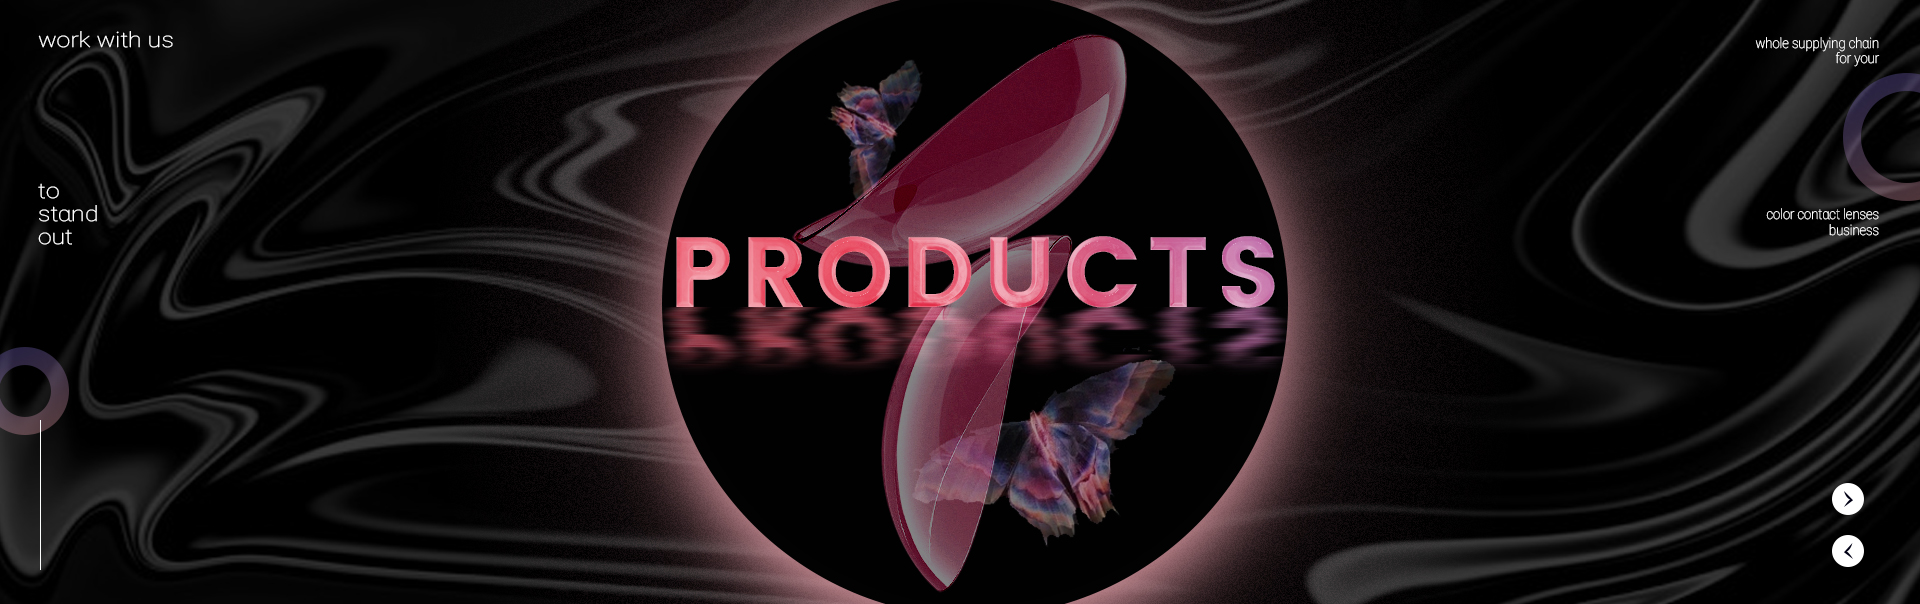 products1